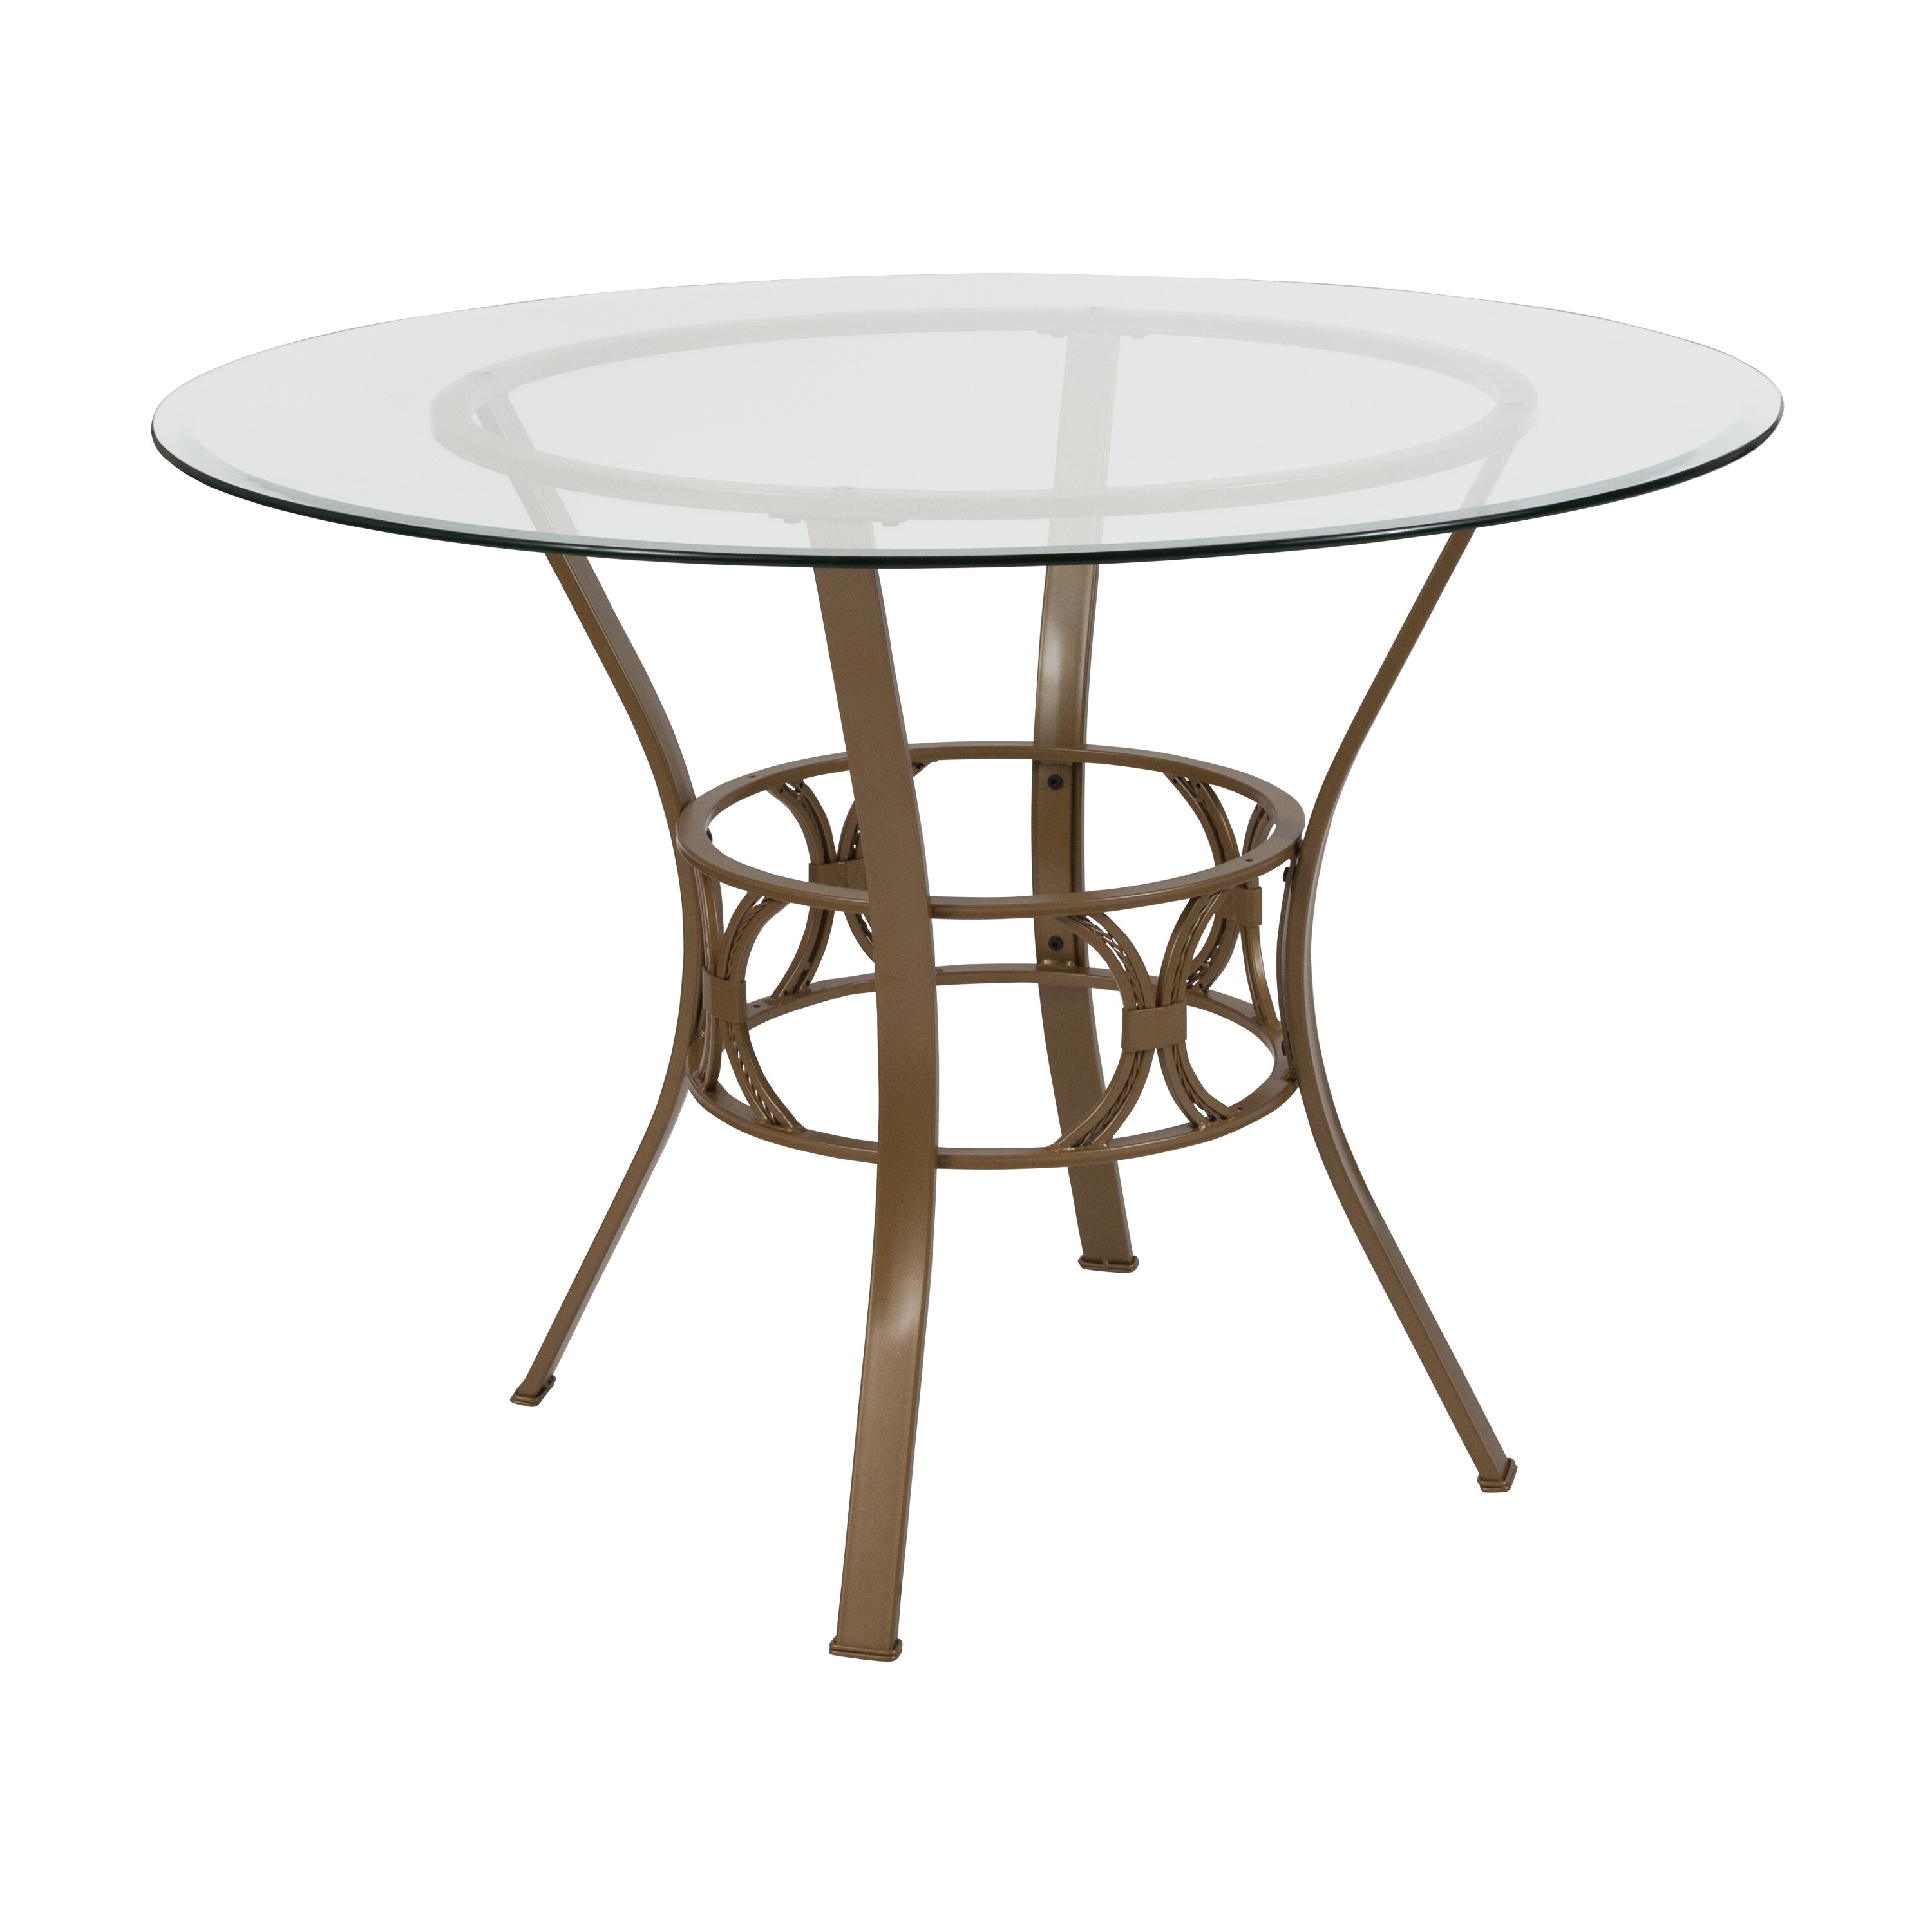 Round Dining Table Glass Top, Round Glass Dining Table Metal Base